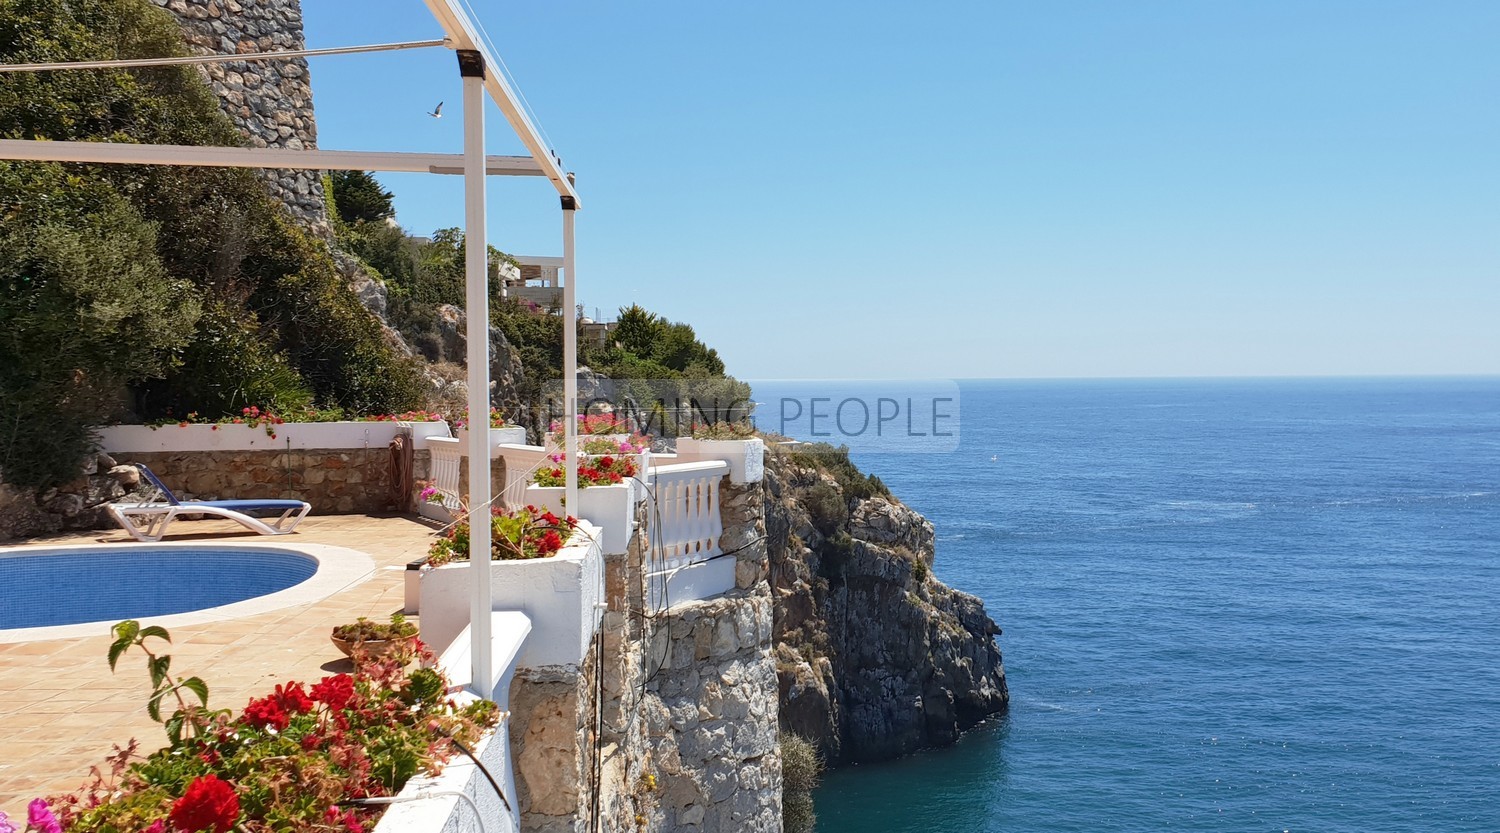 [RENTED OUT]: Villa on a cliff, facing the bay... and walking distance to town. Peace and quiet guaranteed!